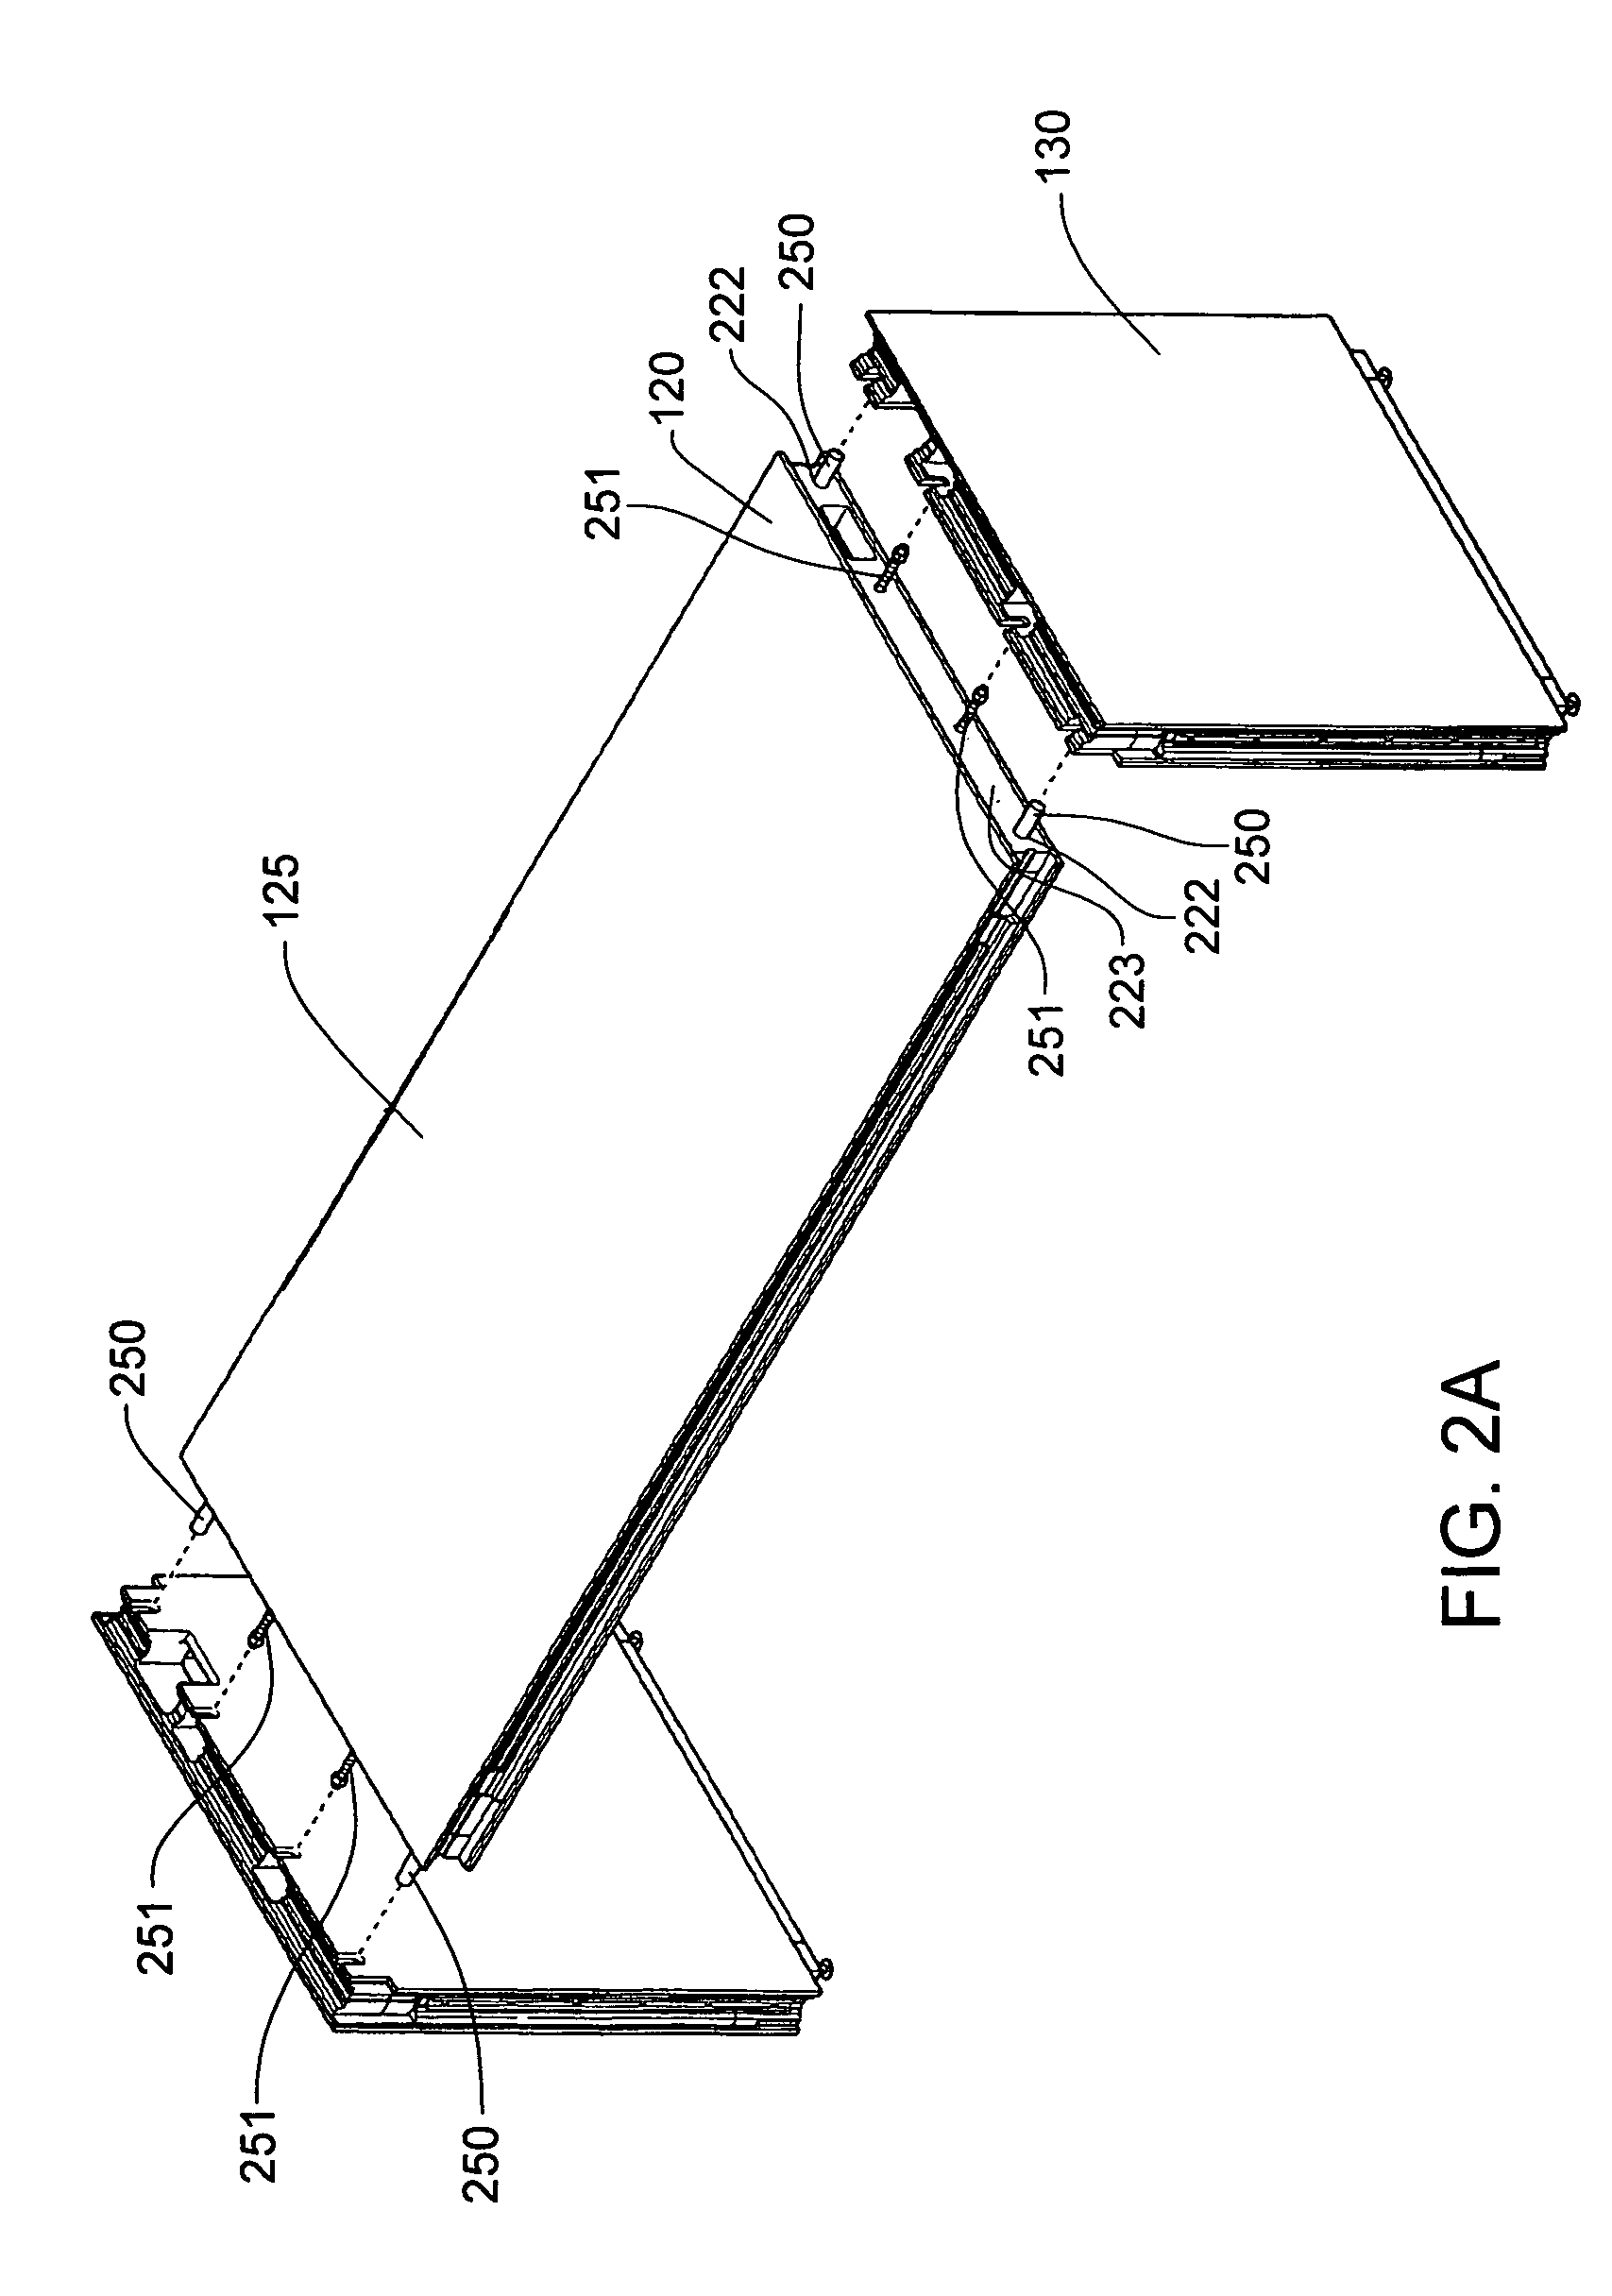 Dowel assembly for a furniture system